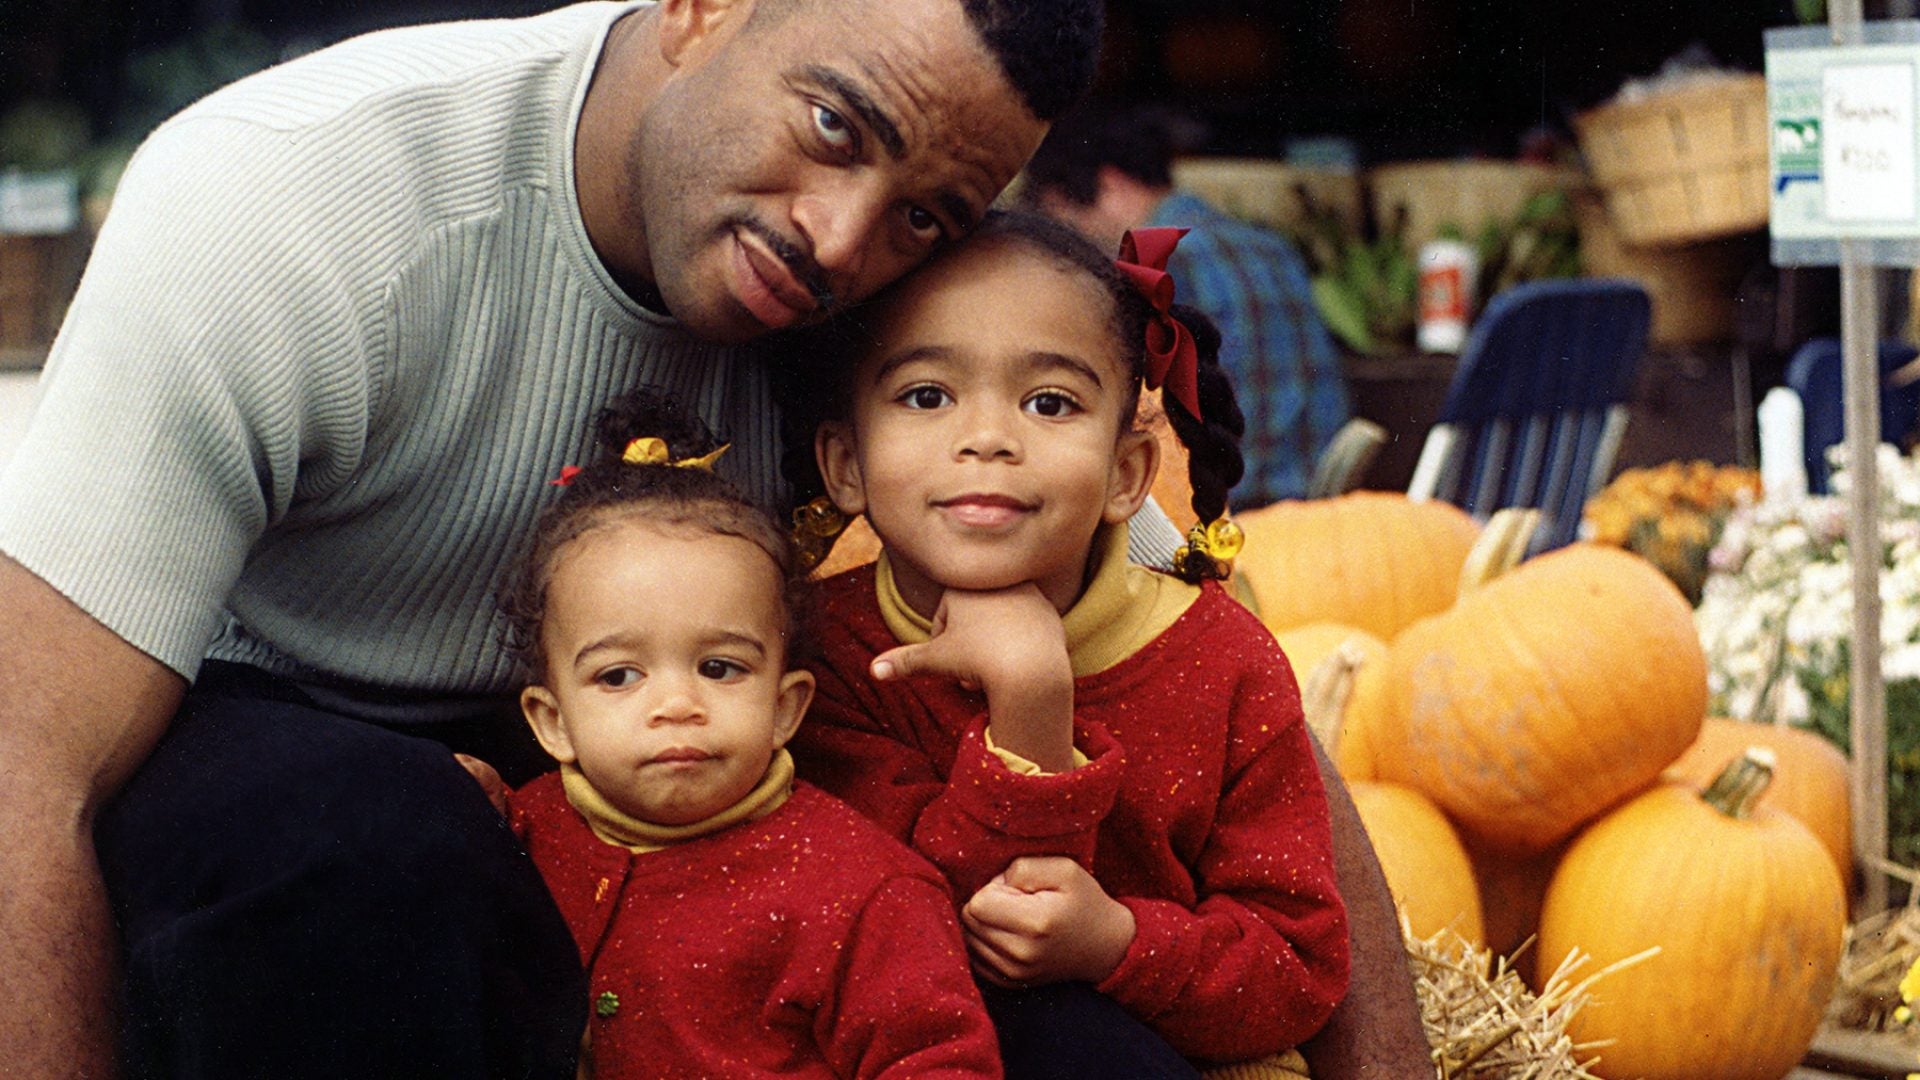 The Late Stuart Scott's Daughters, Sydni And Taelor, On Grief And Upholding Their Father’s Legacy